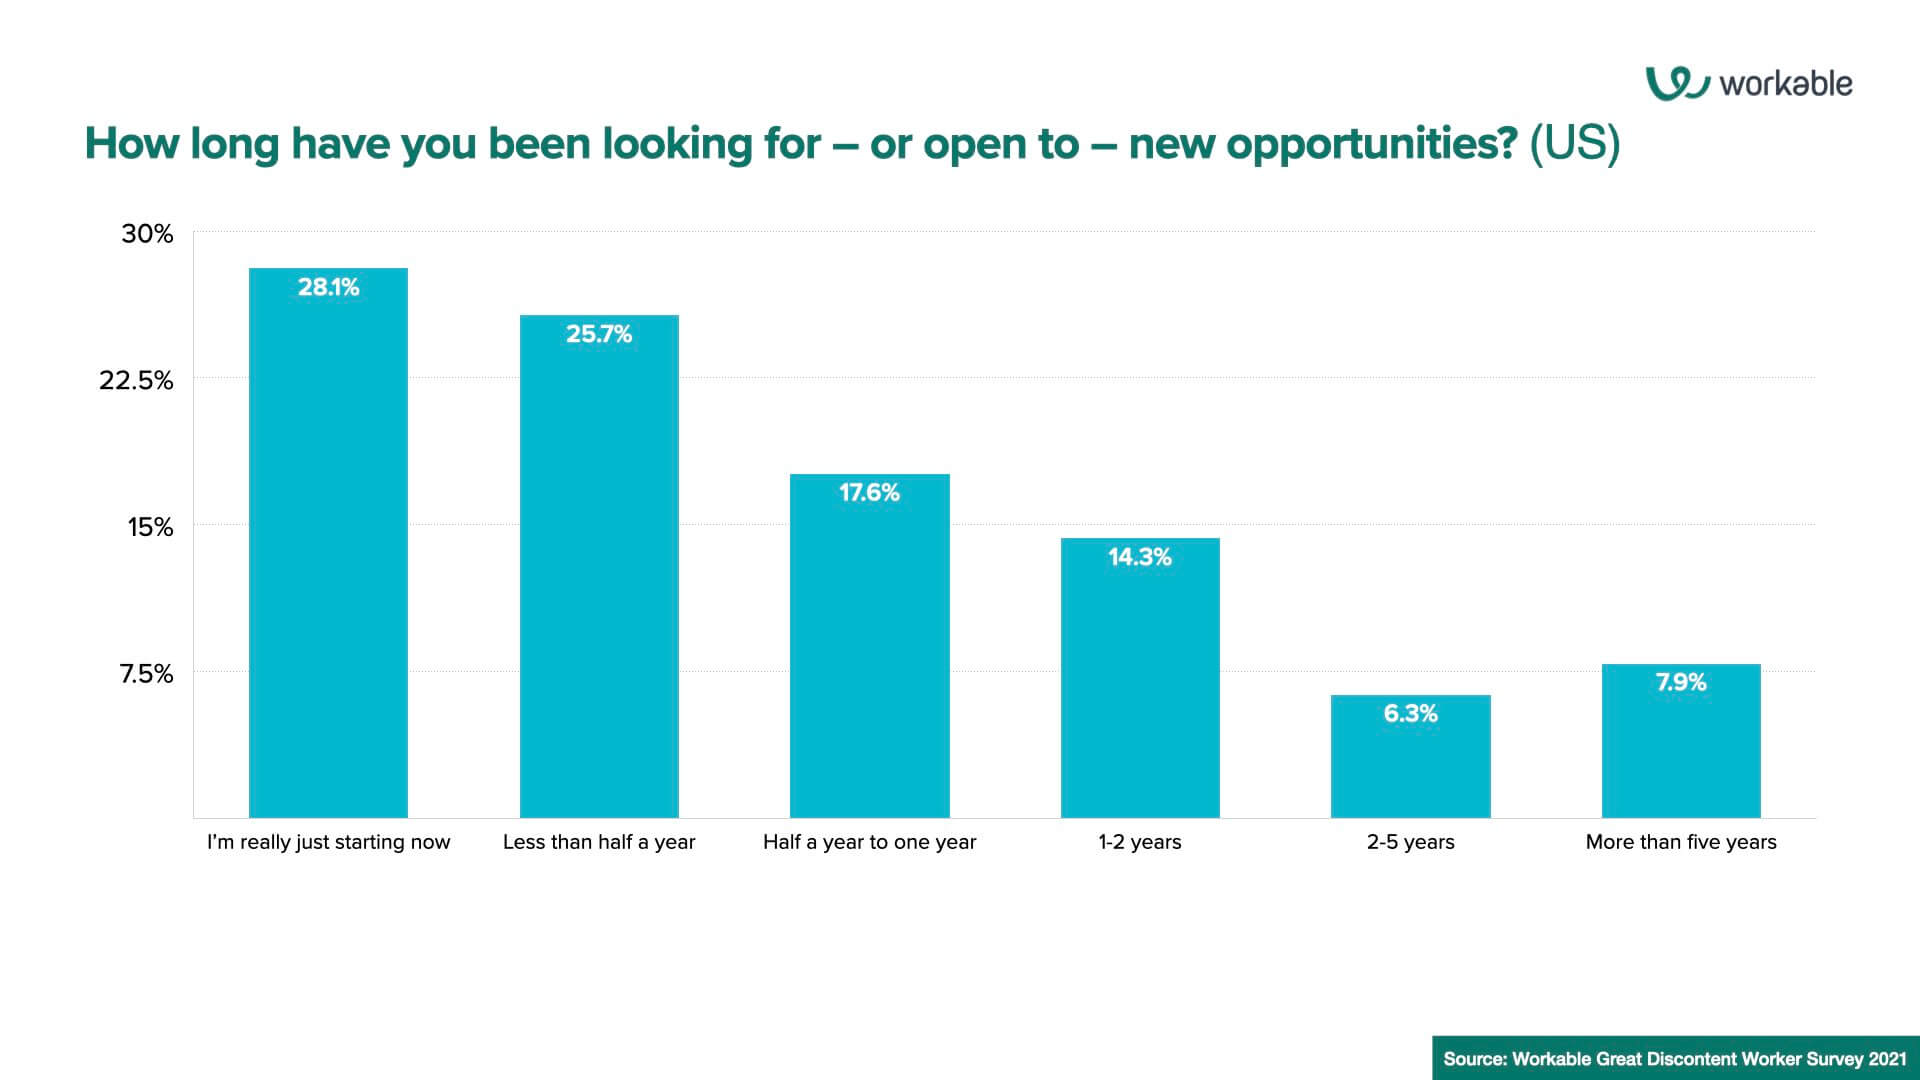 Great Discontent: How long have you been looking for – or open to – new opportunities? (US)